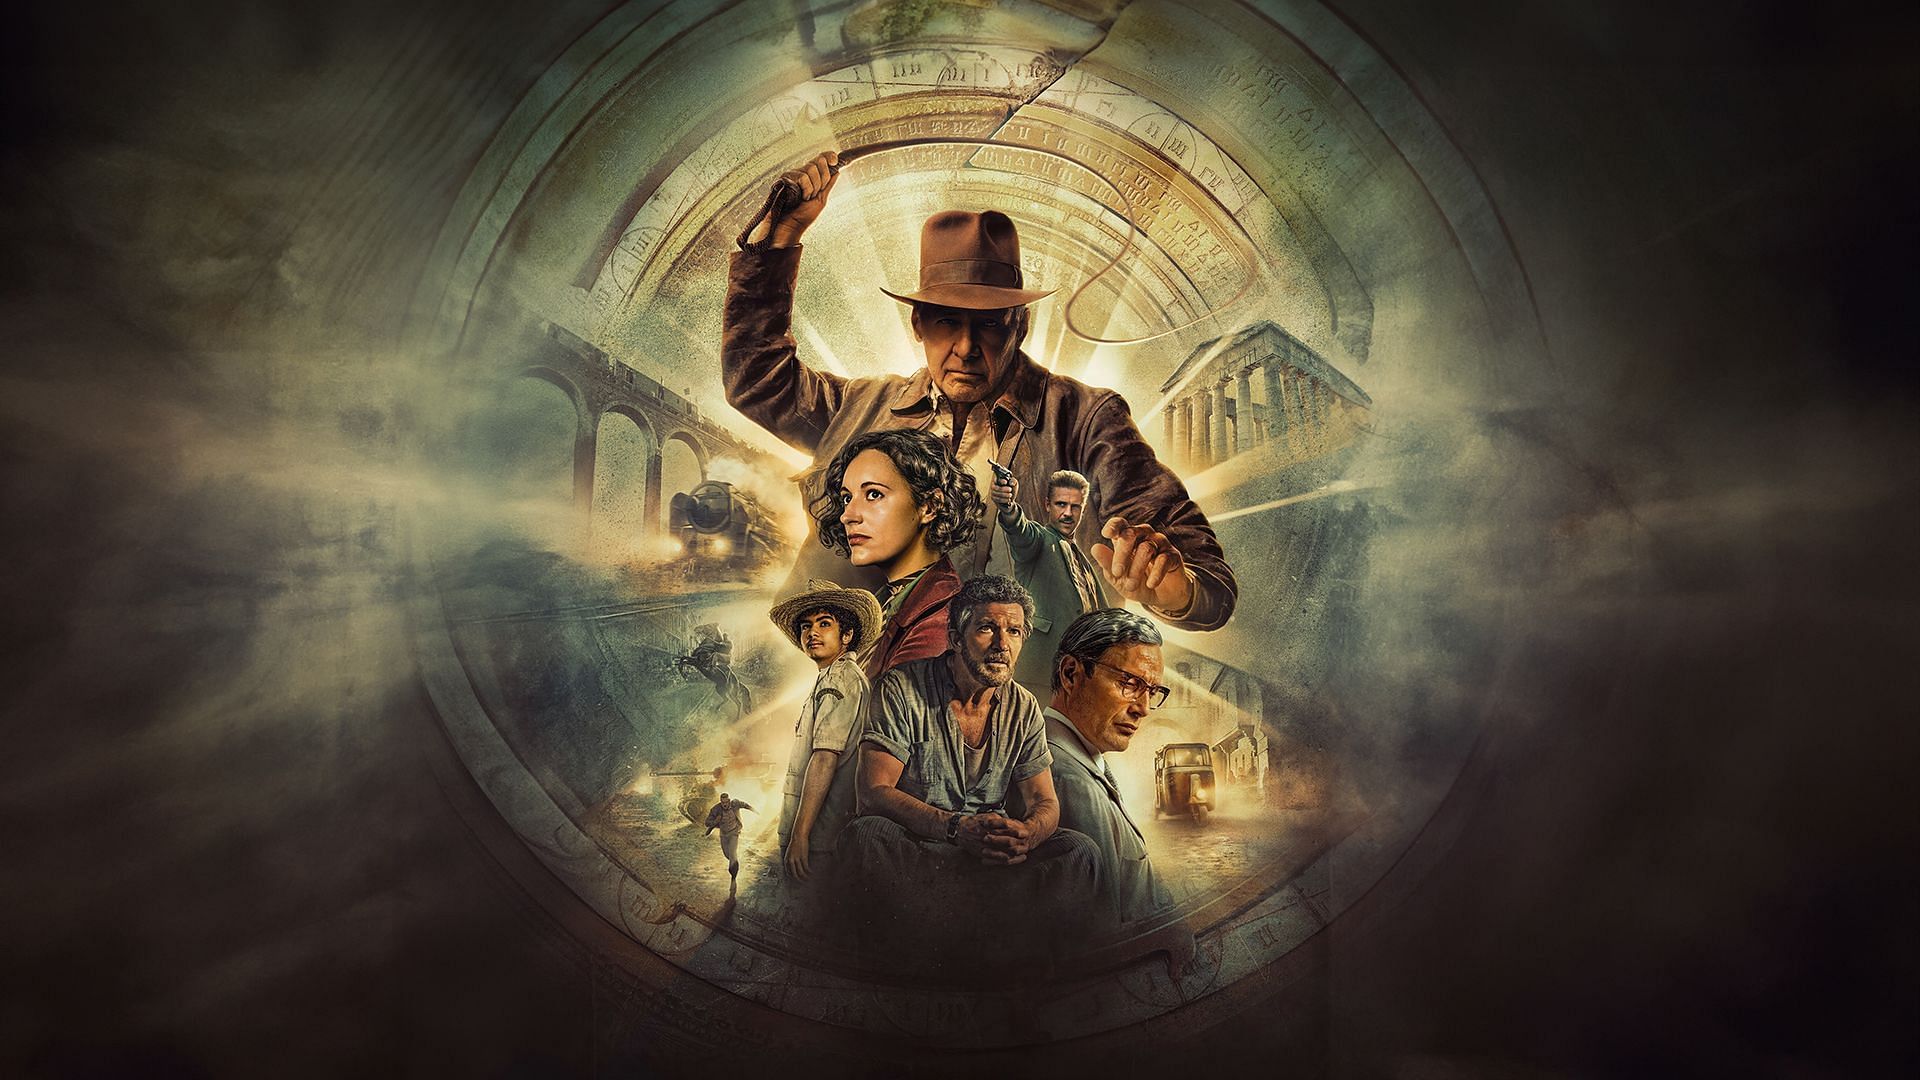 Indiana Jones 5 officially titled Indiana Jones and the Dial of Destiny unfortunately didn